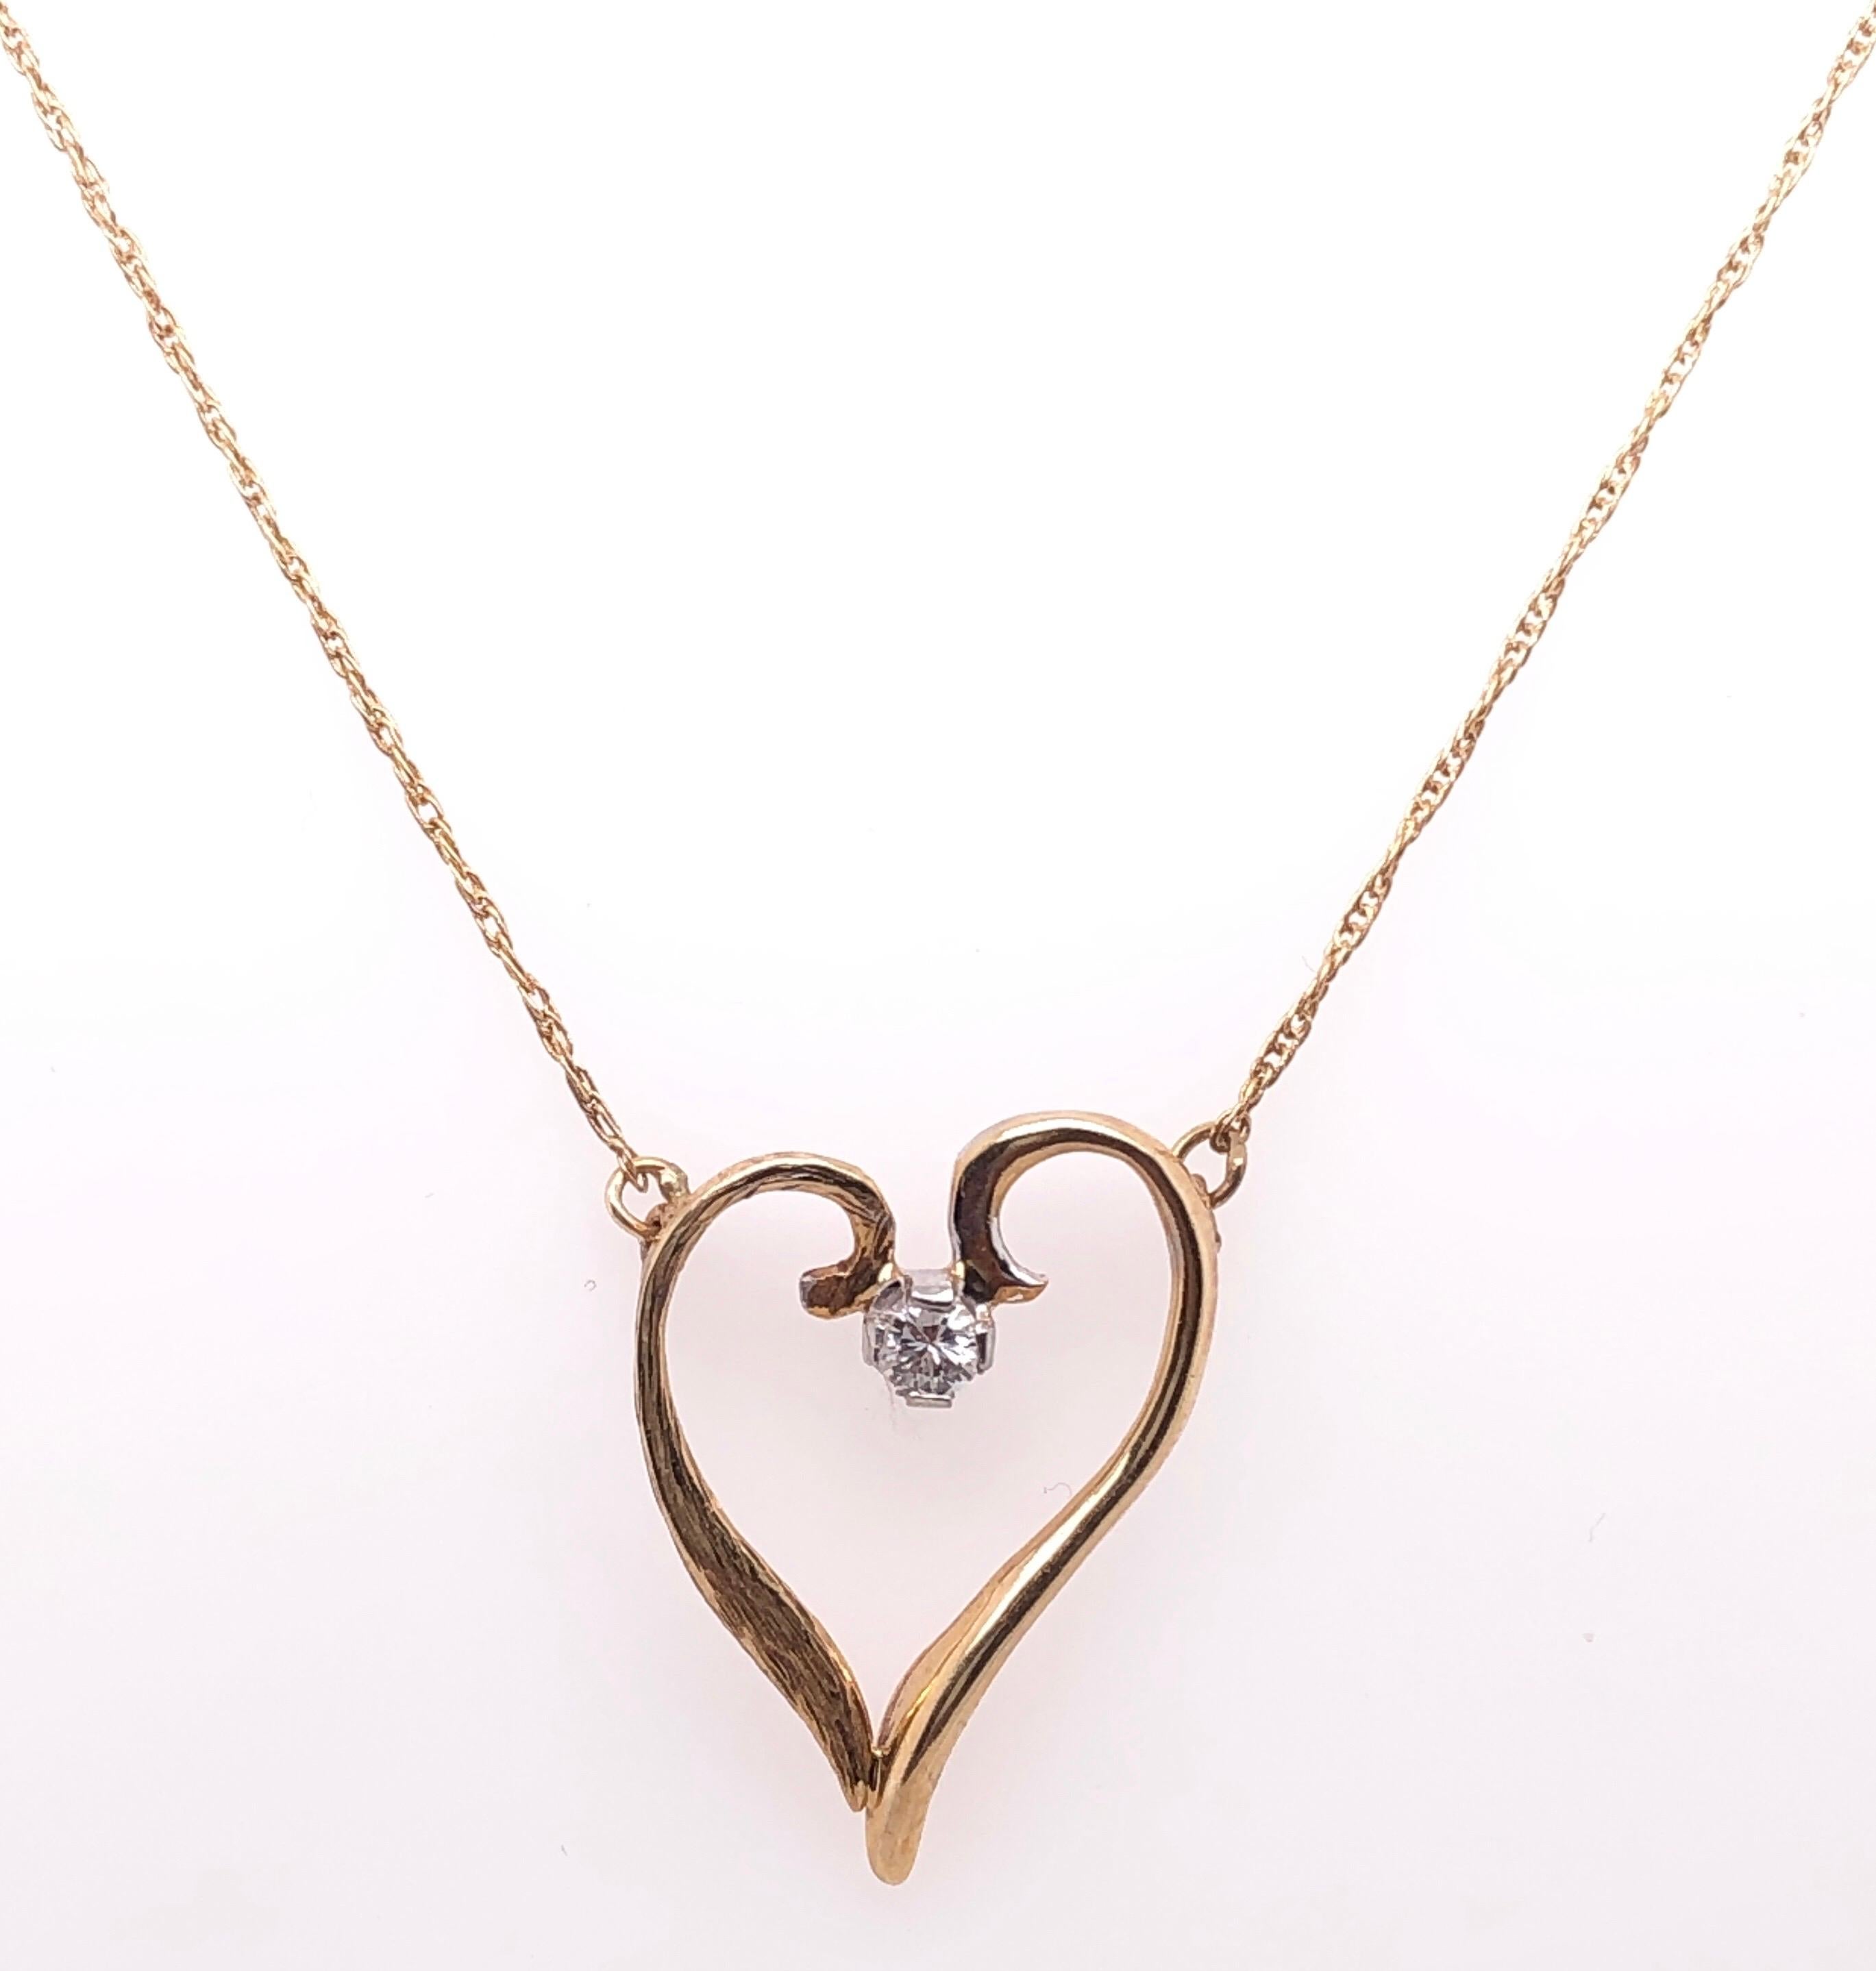 14 Karat Yellow Gold 16 inch Necklace with Heart Pendant and Round Diamond.
0.10 Total Diamond Weight.
2.49 grams total weight.